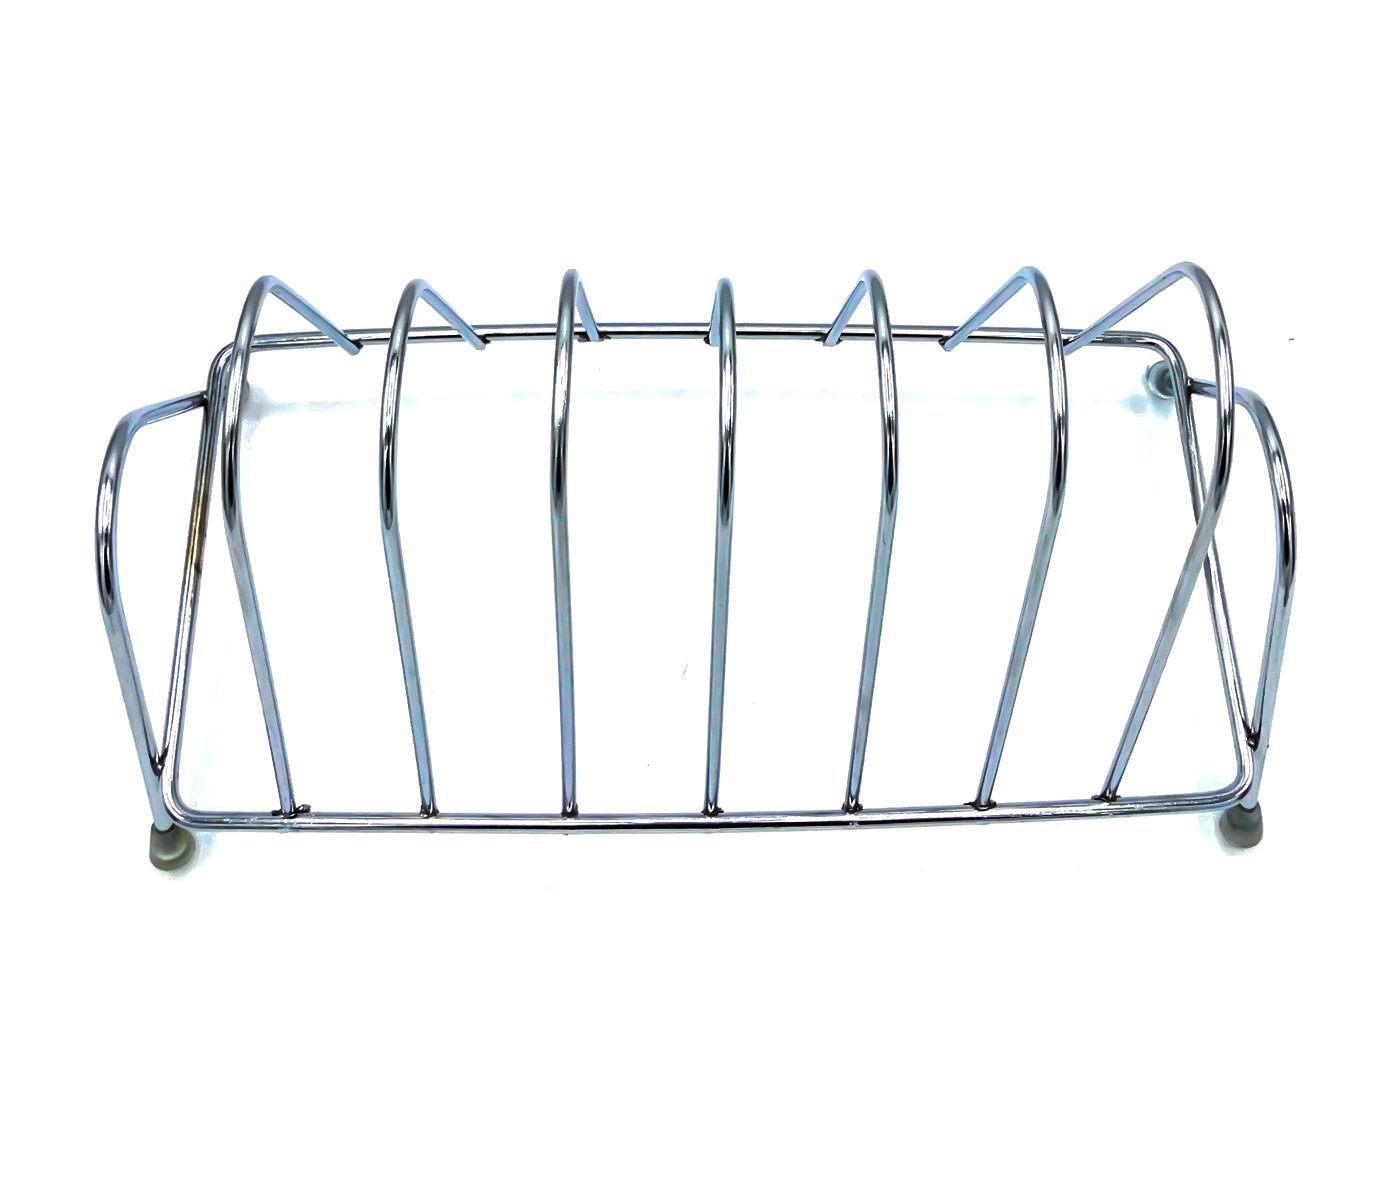 2135 Stainless Steel Square Plate Rack Stand Holder for Kitchen - SkyShopy